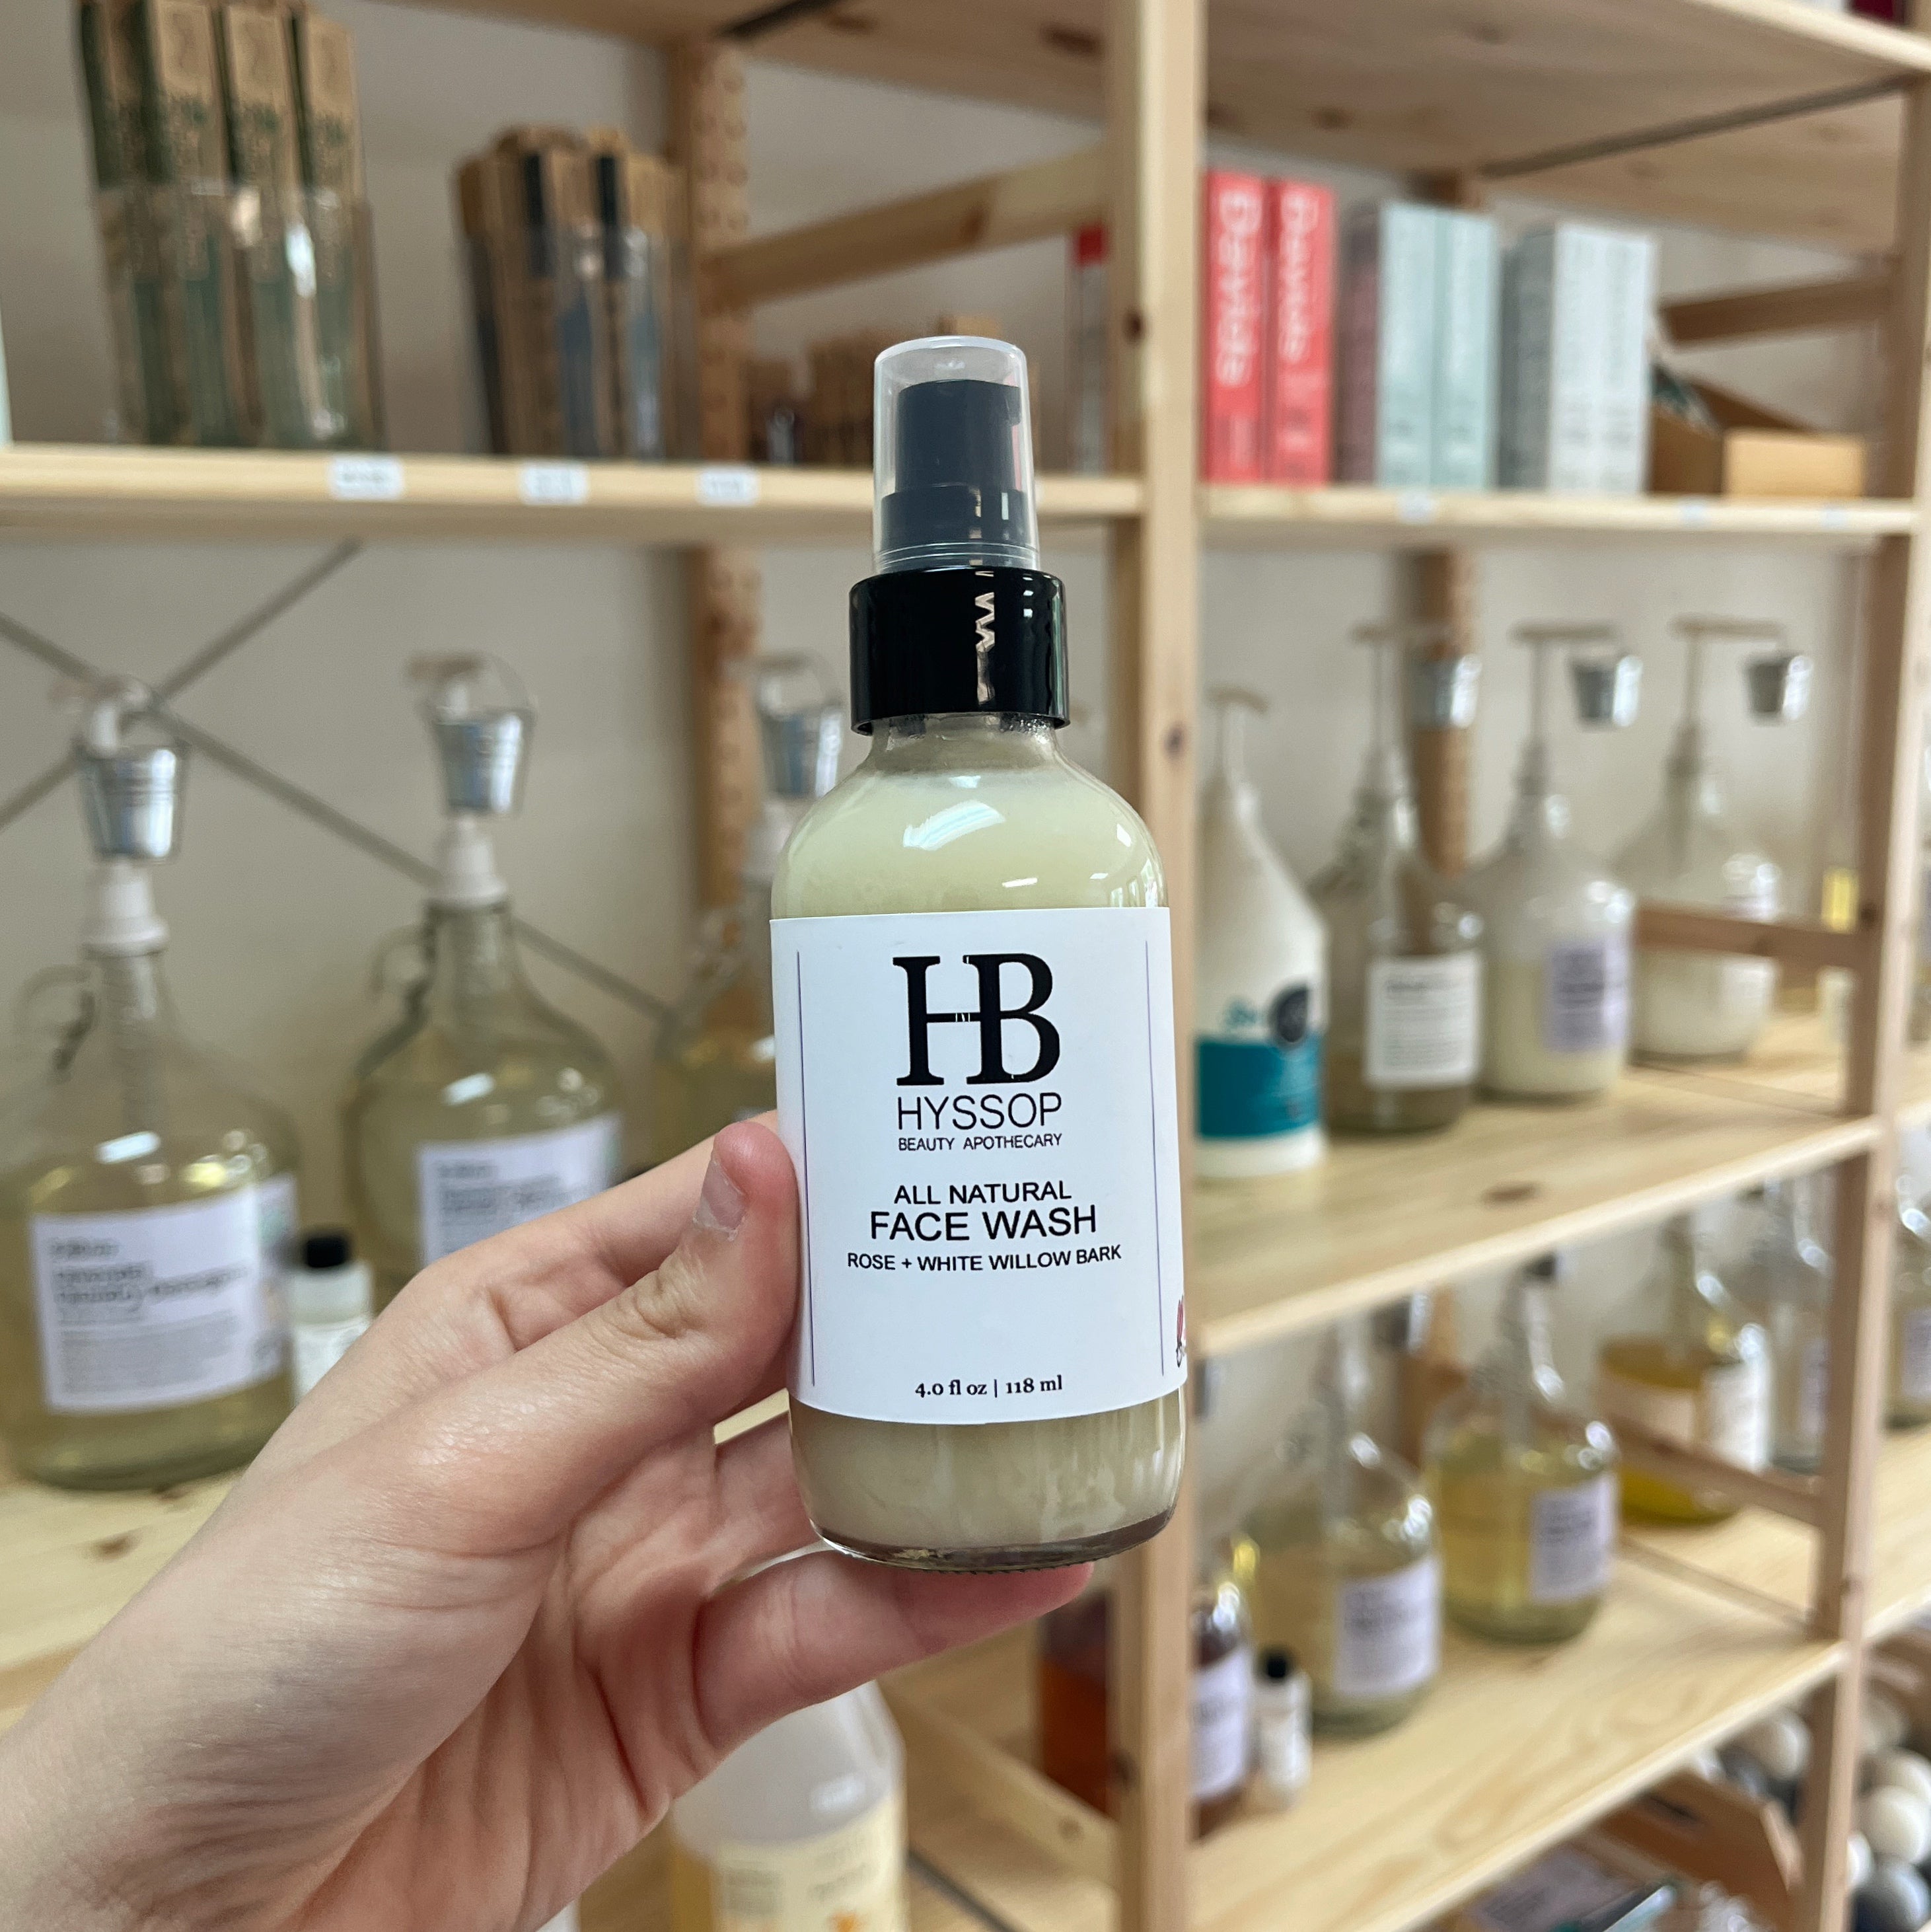 Rose & White Willow Bark Face Wash | Hyssop Beauty Apothecary